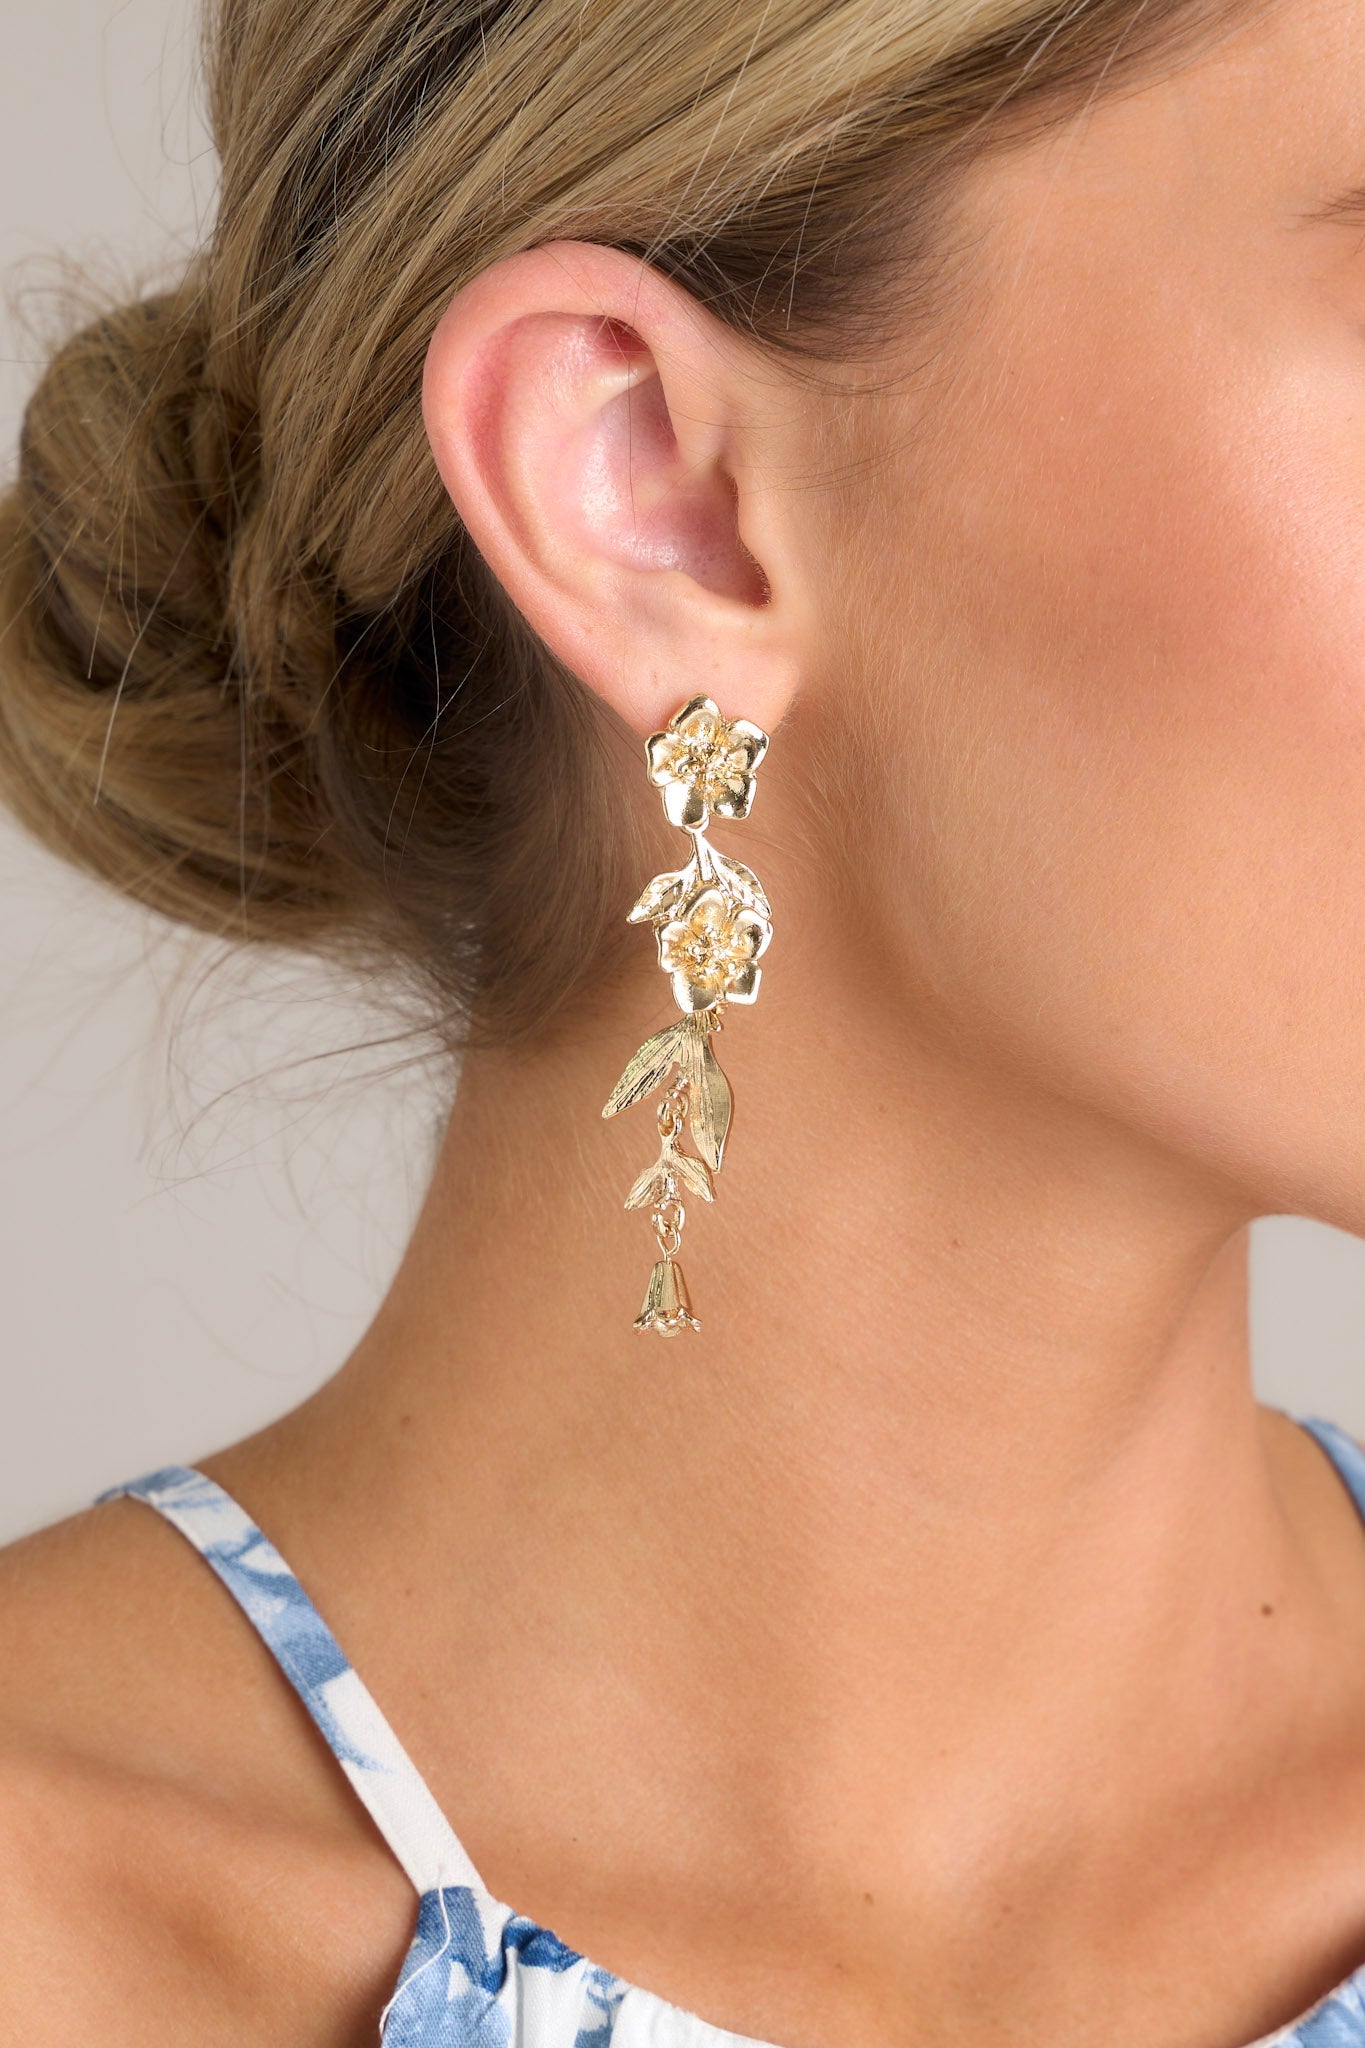 Close up view of these gold floral earrings that feature gold hardware, a flower shaped stud, and secure post backings.